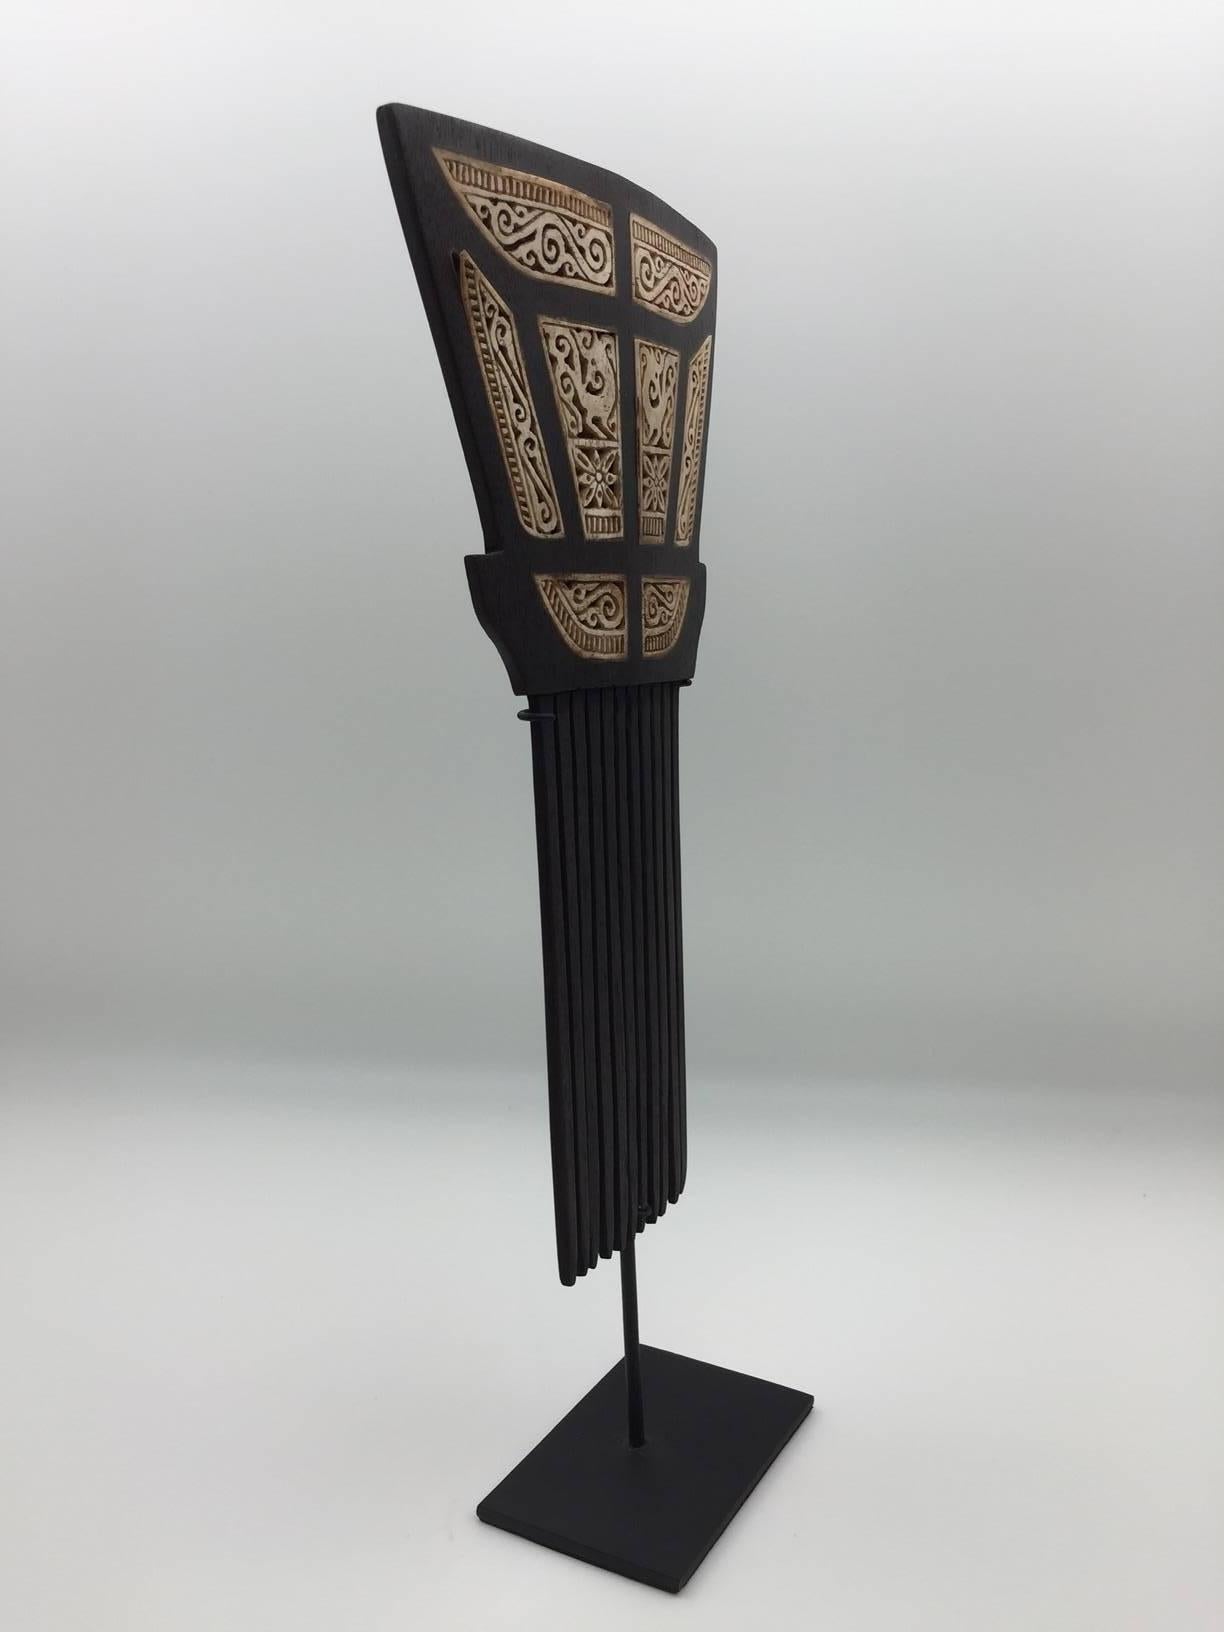 This beautifully carved wooden hair comb, inlaid with bone is from Tanimbar, which forms part of the spice islands in the Maluku province of Indonesia. It is mounted on a black painted custom metal mount. The hair comb was clearly inspired from the